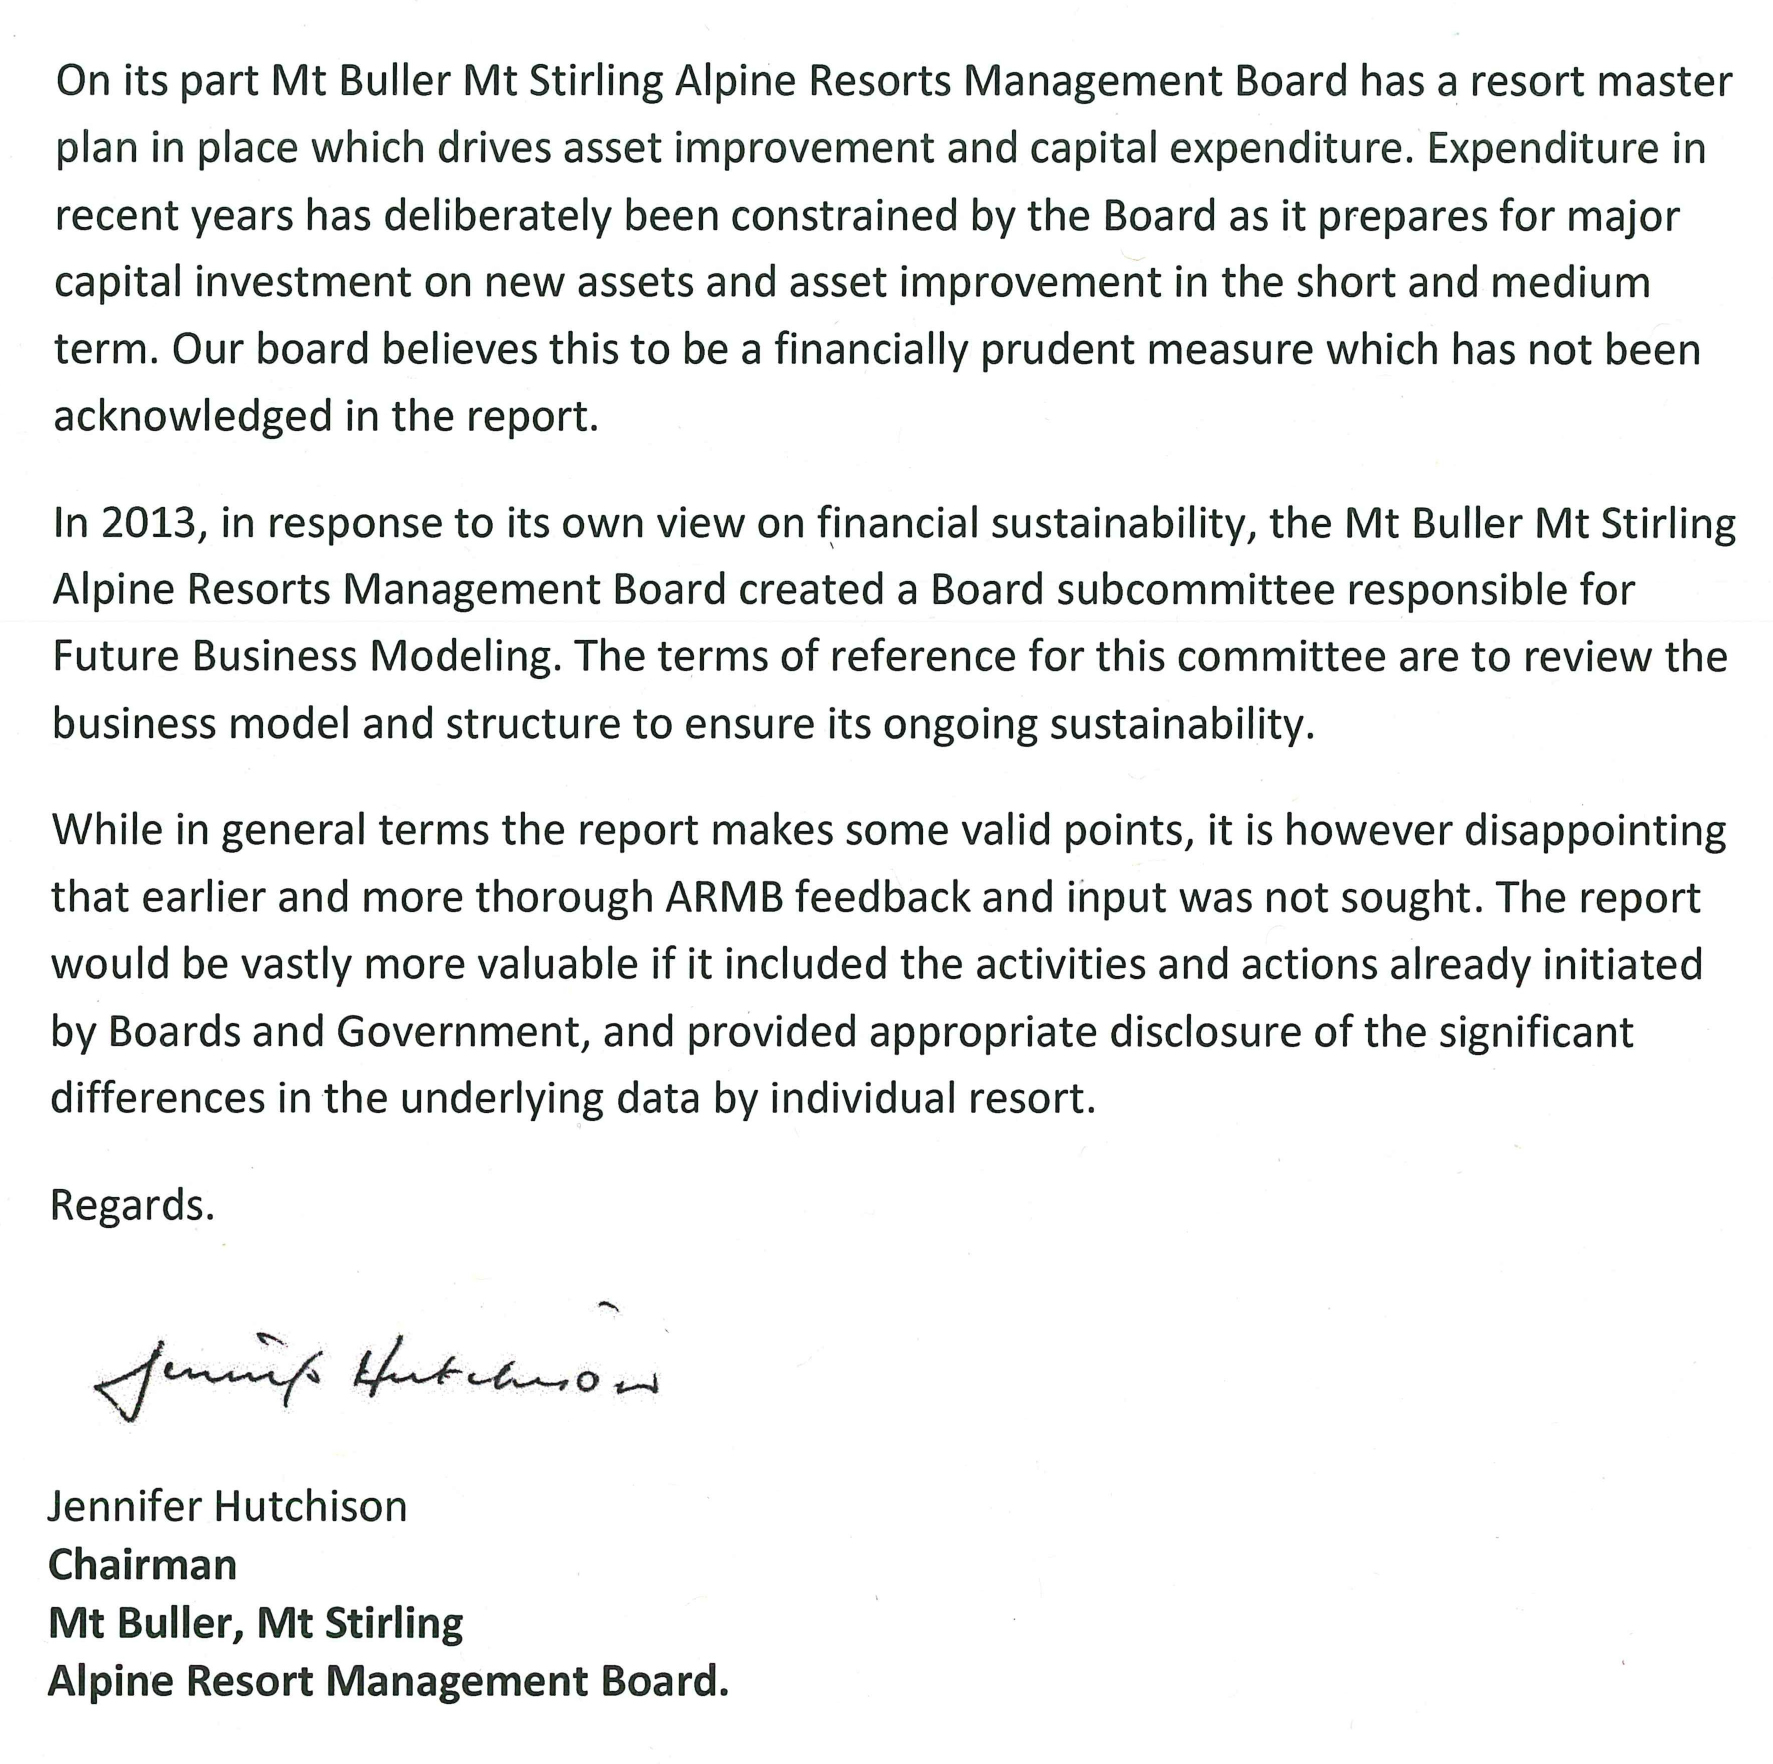  RESPONSE provided by the Chairman, Mt Buller Mt Stirling Alpine Resort Management Board